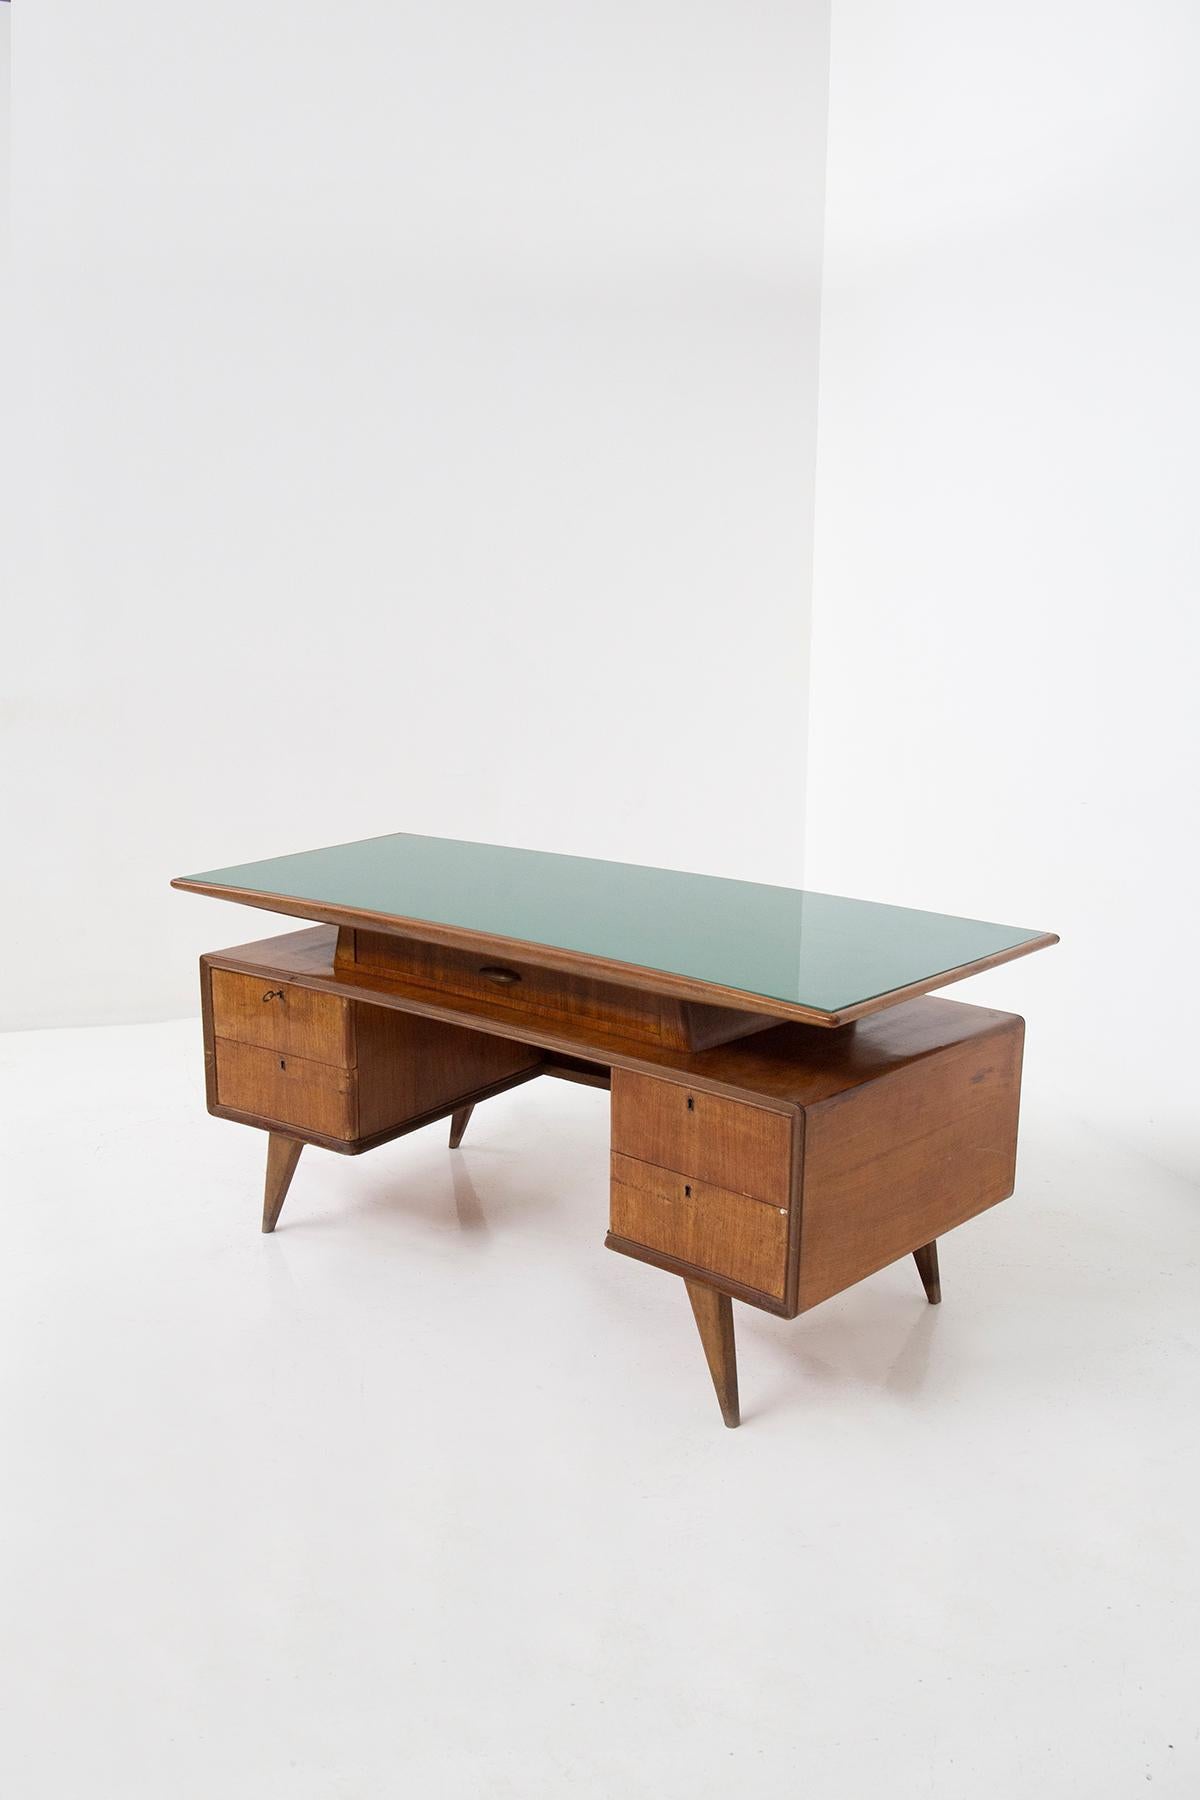 Transport yourself to the enchanting world of 1950s Italian design, where elegance and craftsmanship merged seamlessly. In the heart of this era's creative fervor, you'll discover a vintage Italian desk that's nothing short of a masterpiece, a